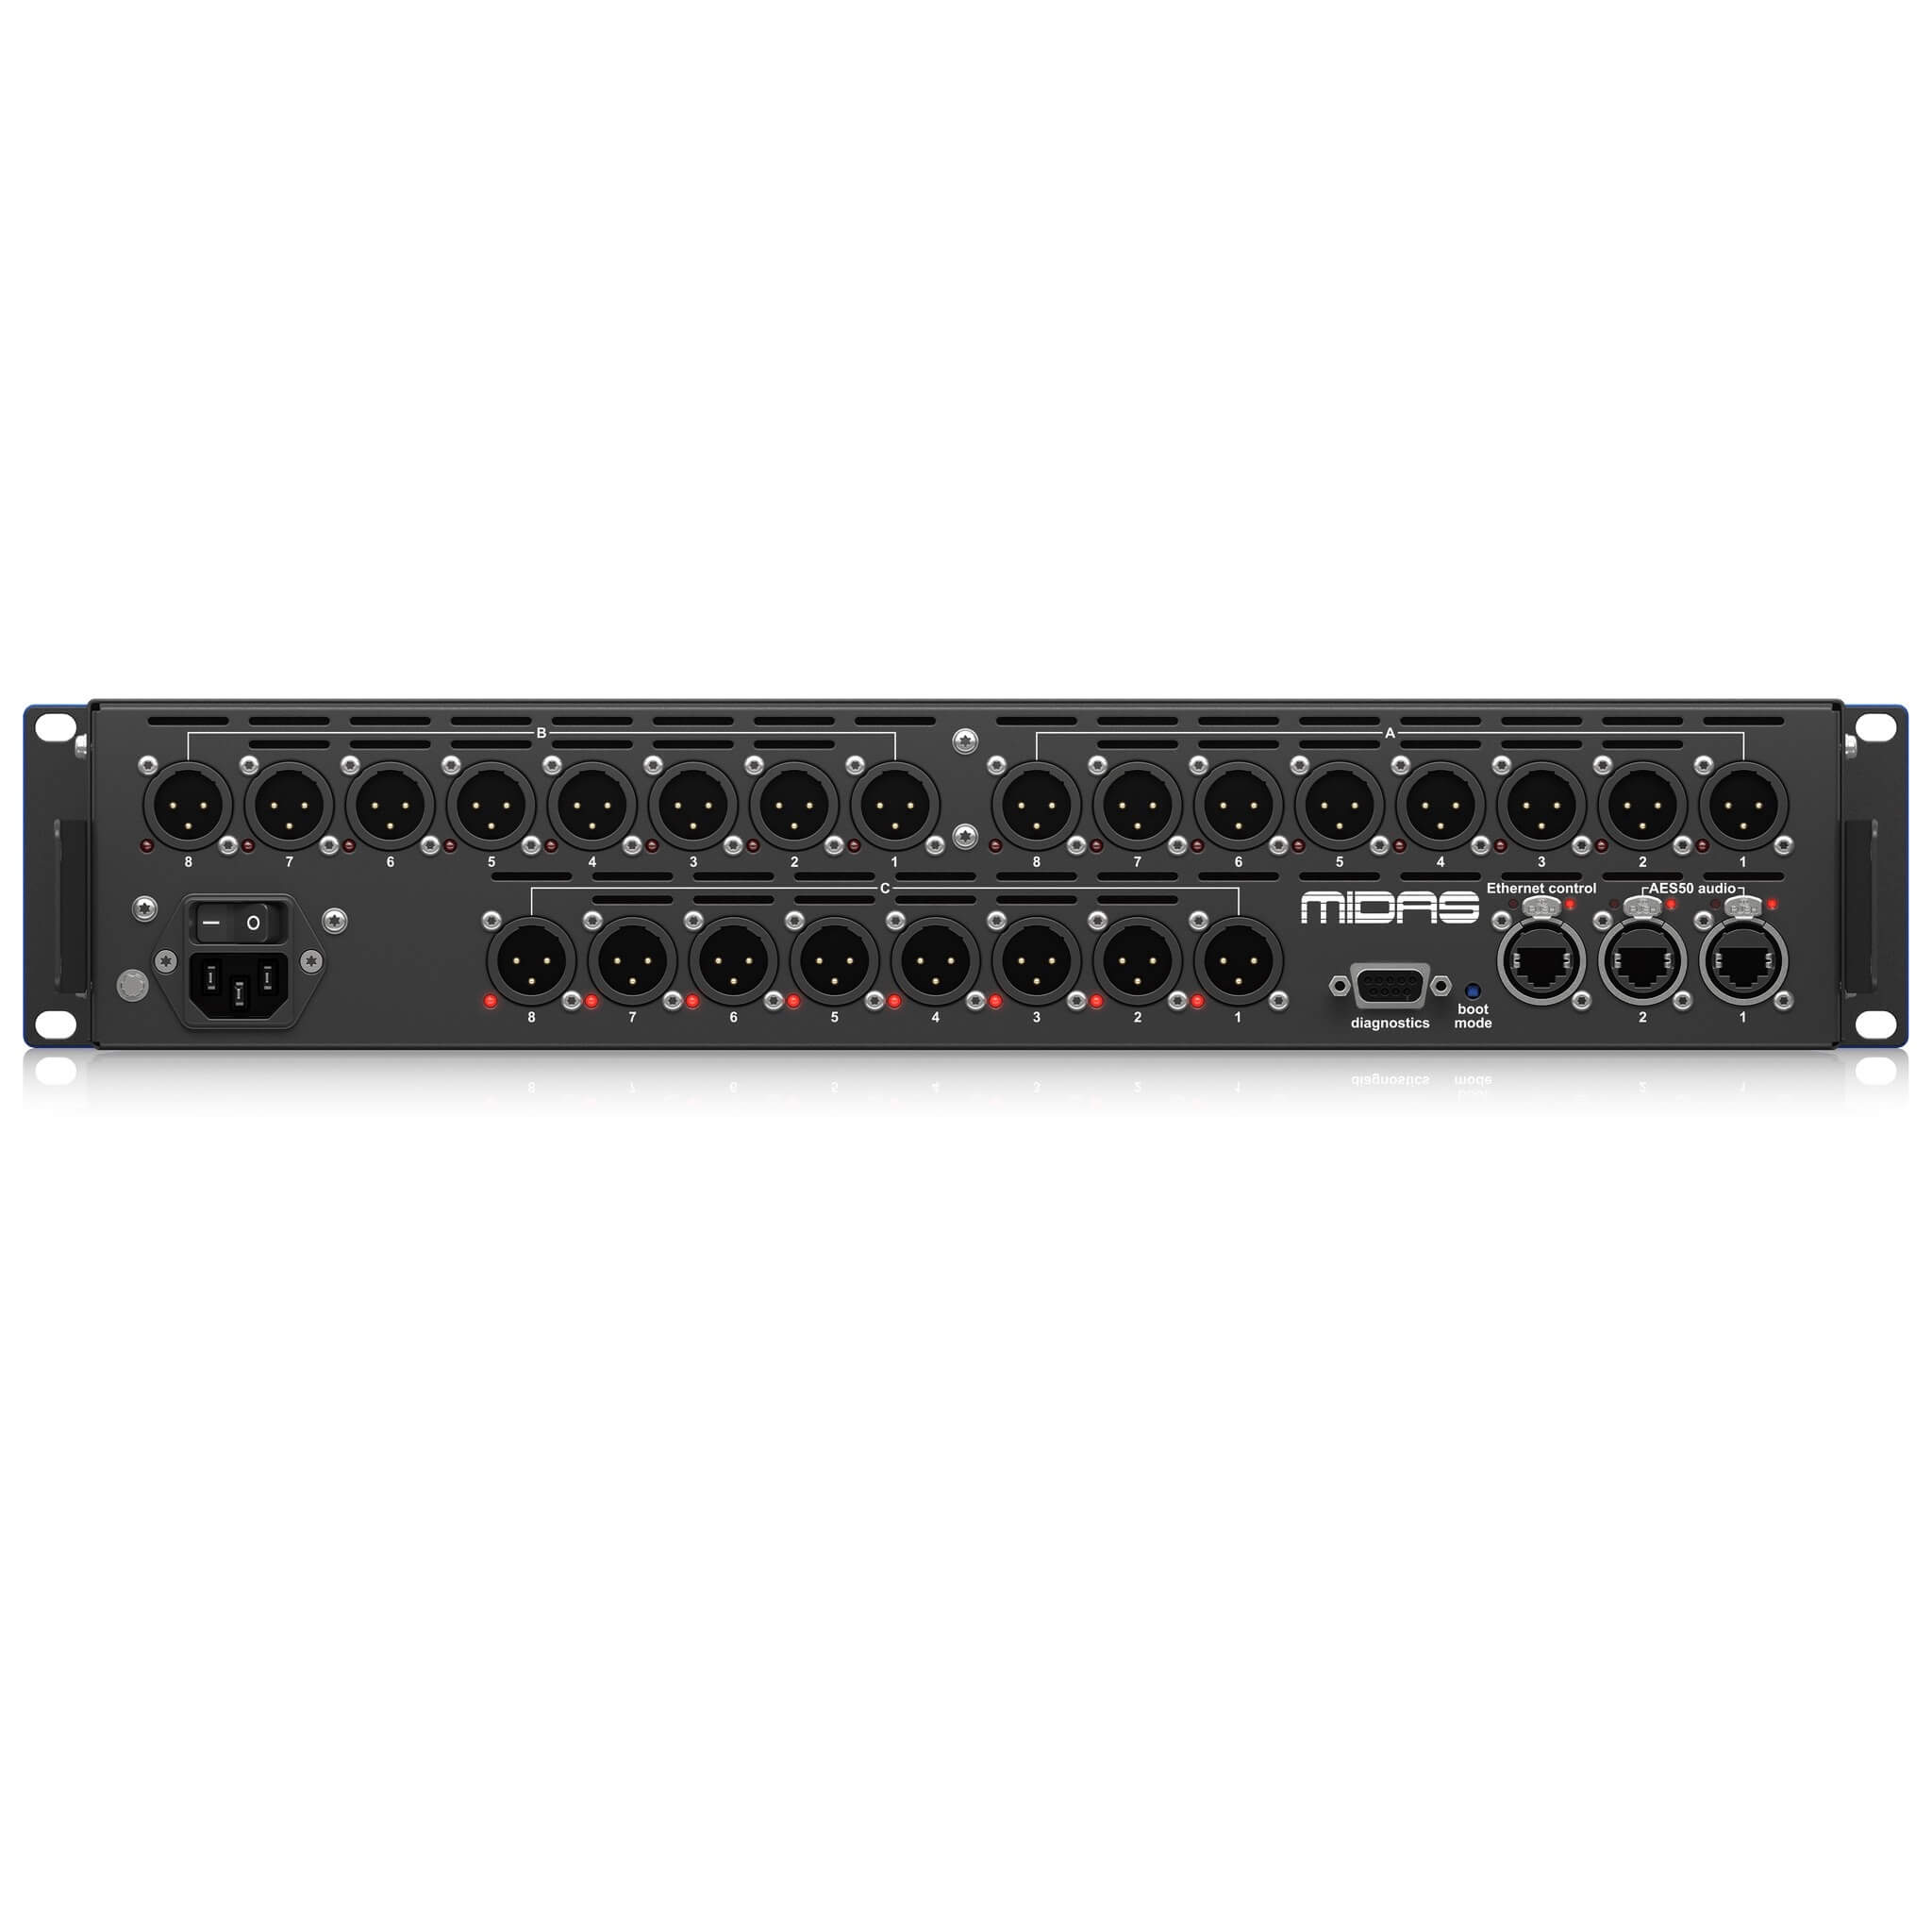 Midas DL152 - 24 Output Stage Box with Dual AES50 Network Ports, rear